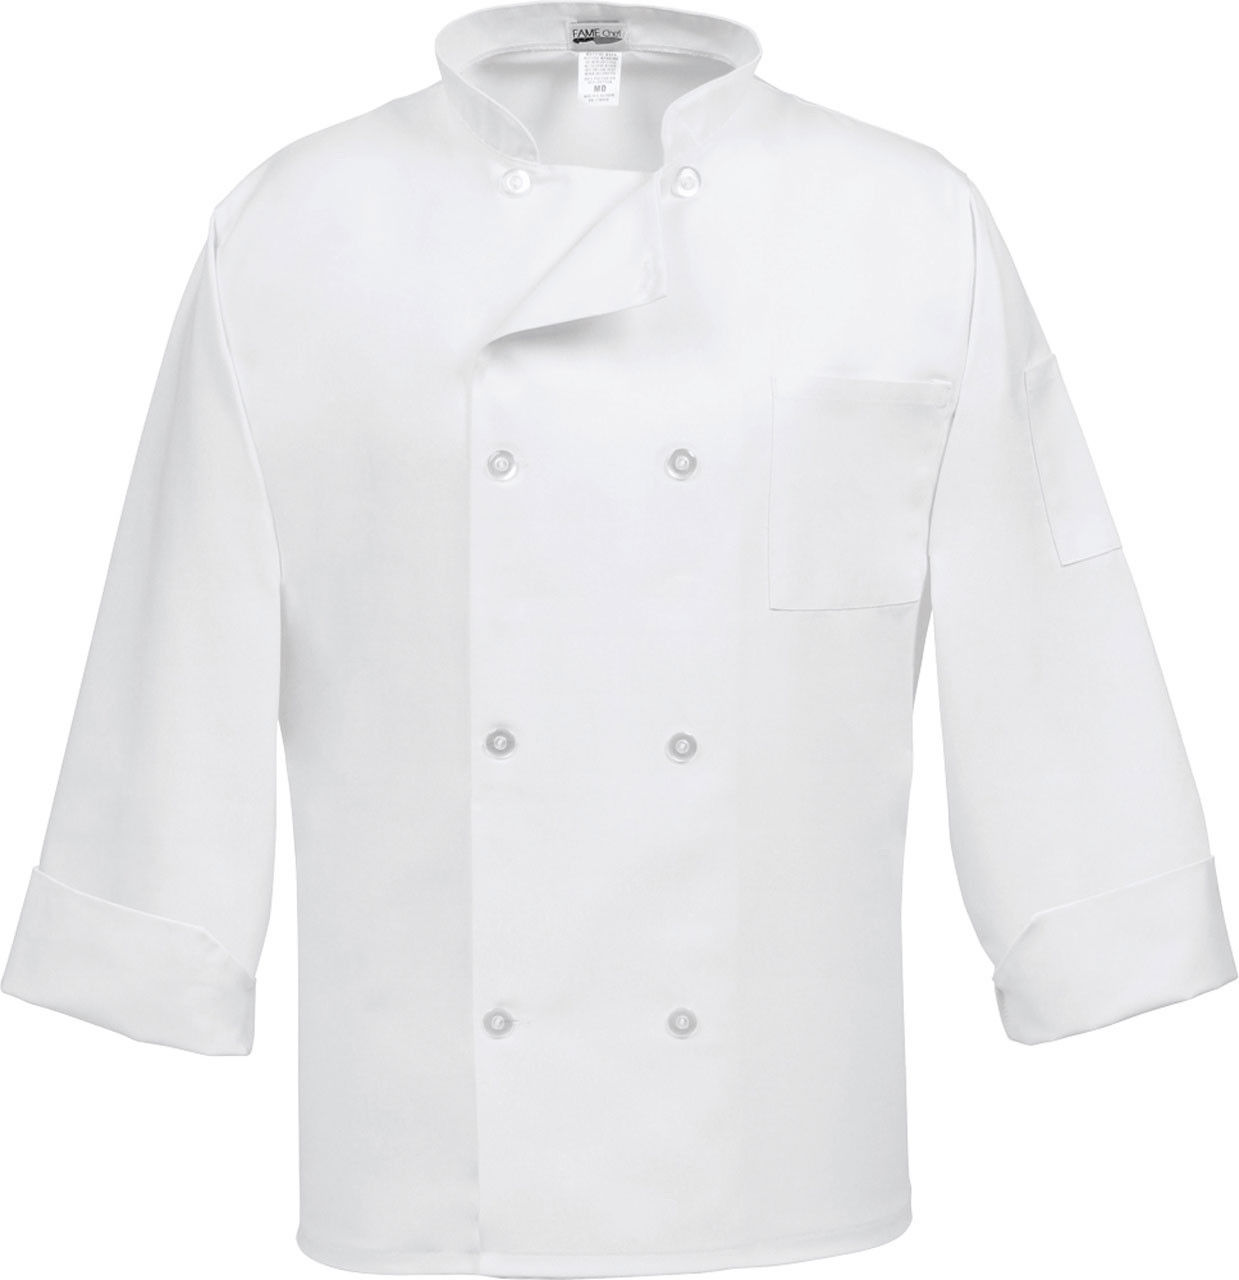 Does the chef's coat have any special features in the inner neckband?